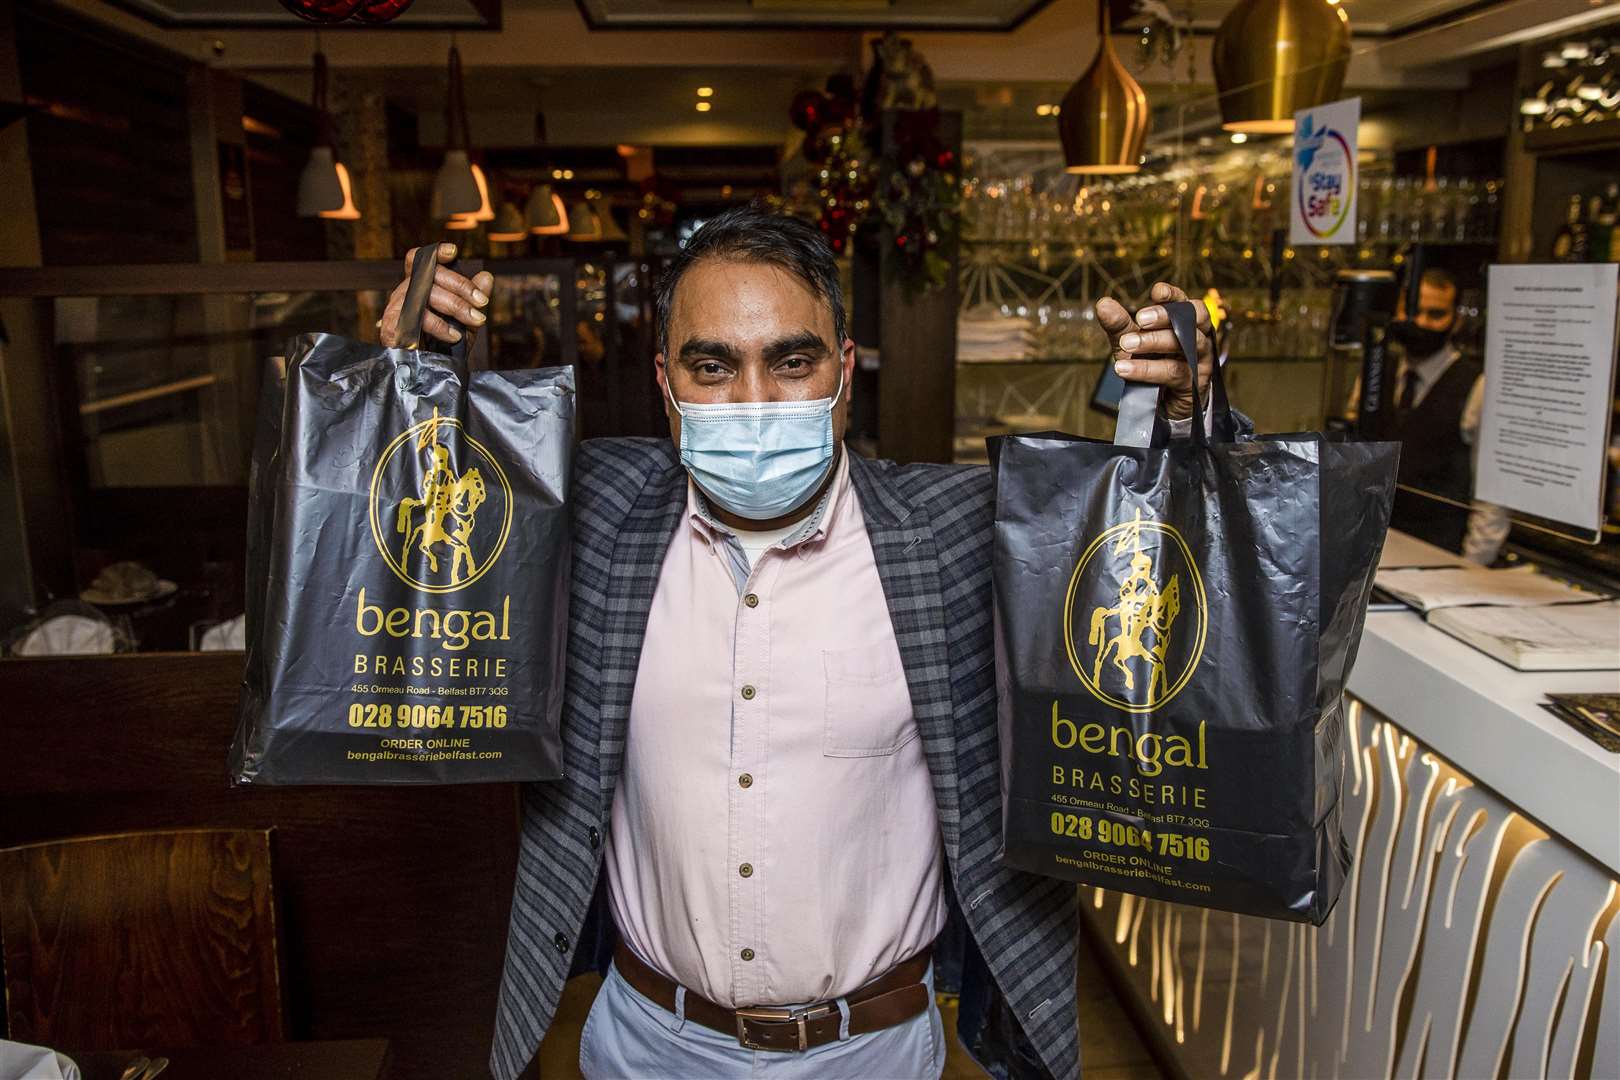 Luthfur Ahmed of Bengal Brasserie in south Belfast will open on Christmas Day for those in need (Liam McBurney/PA)